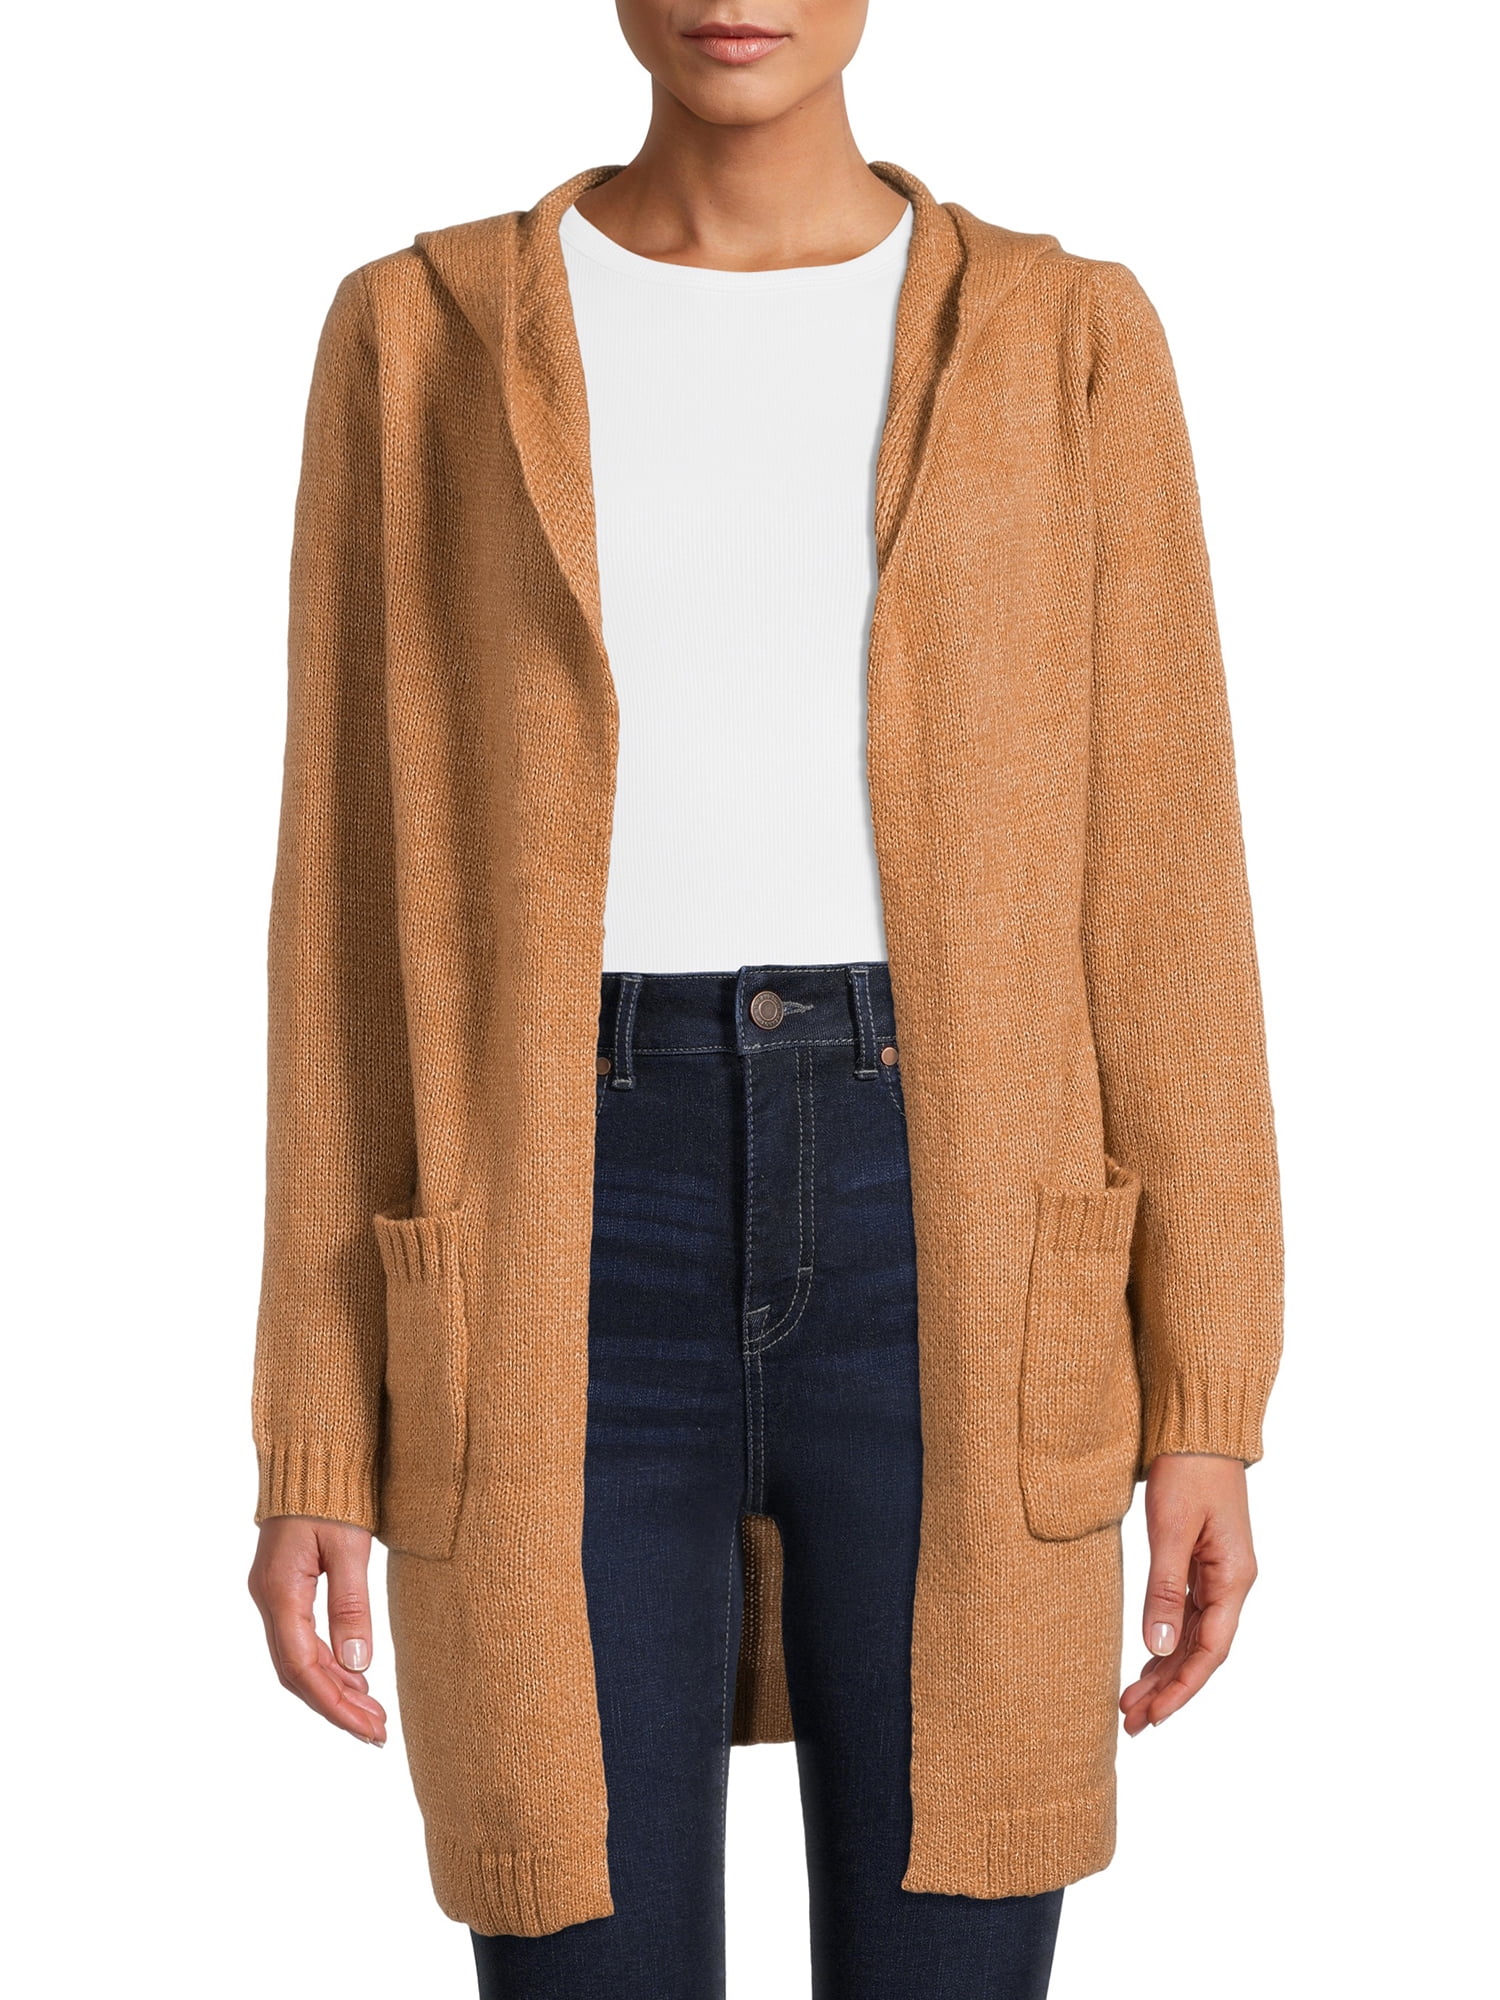 By Design Women's Florence Open-Front Cardigan Sweater with Hood